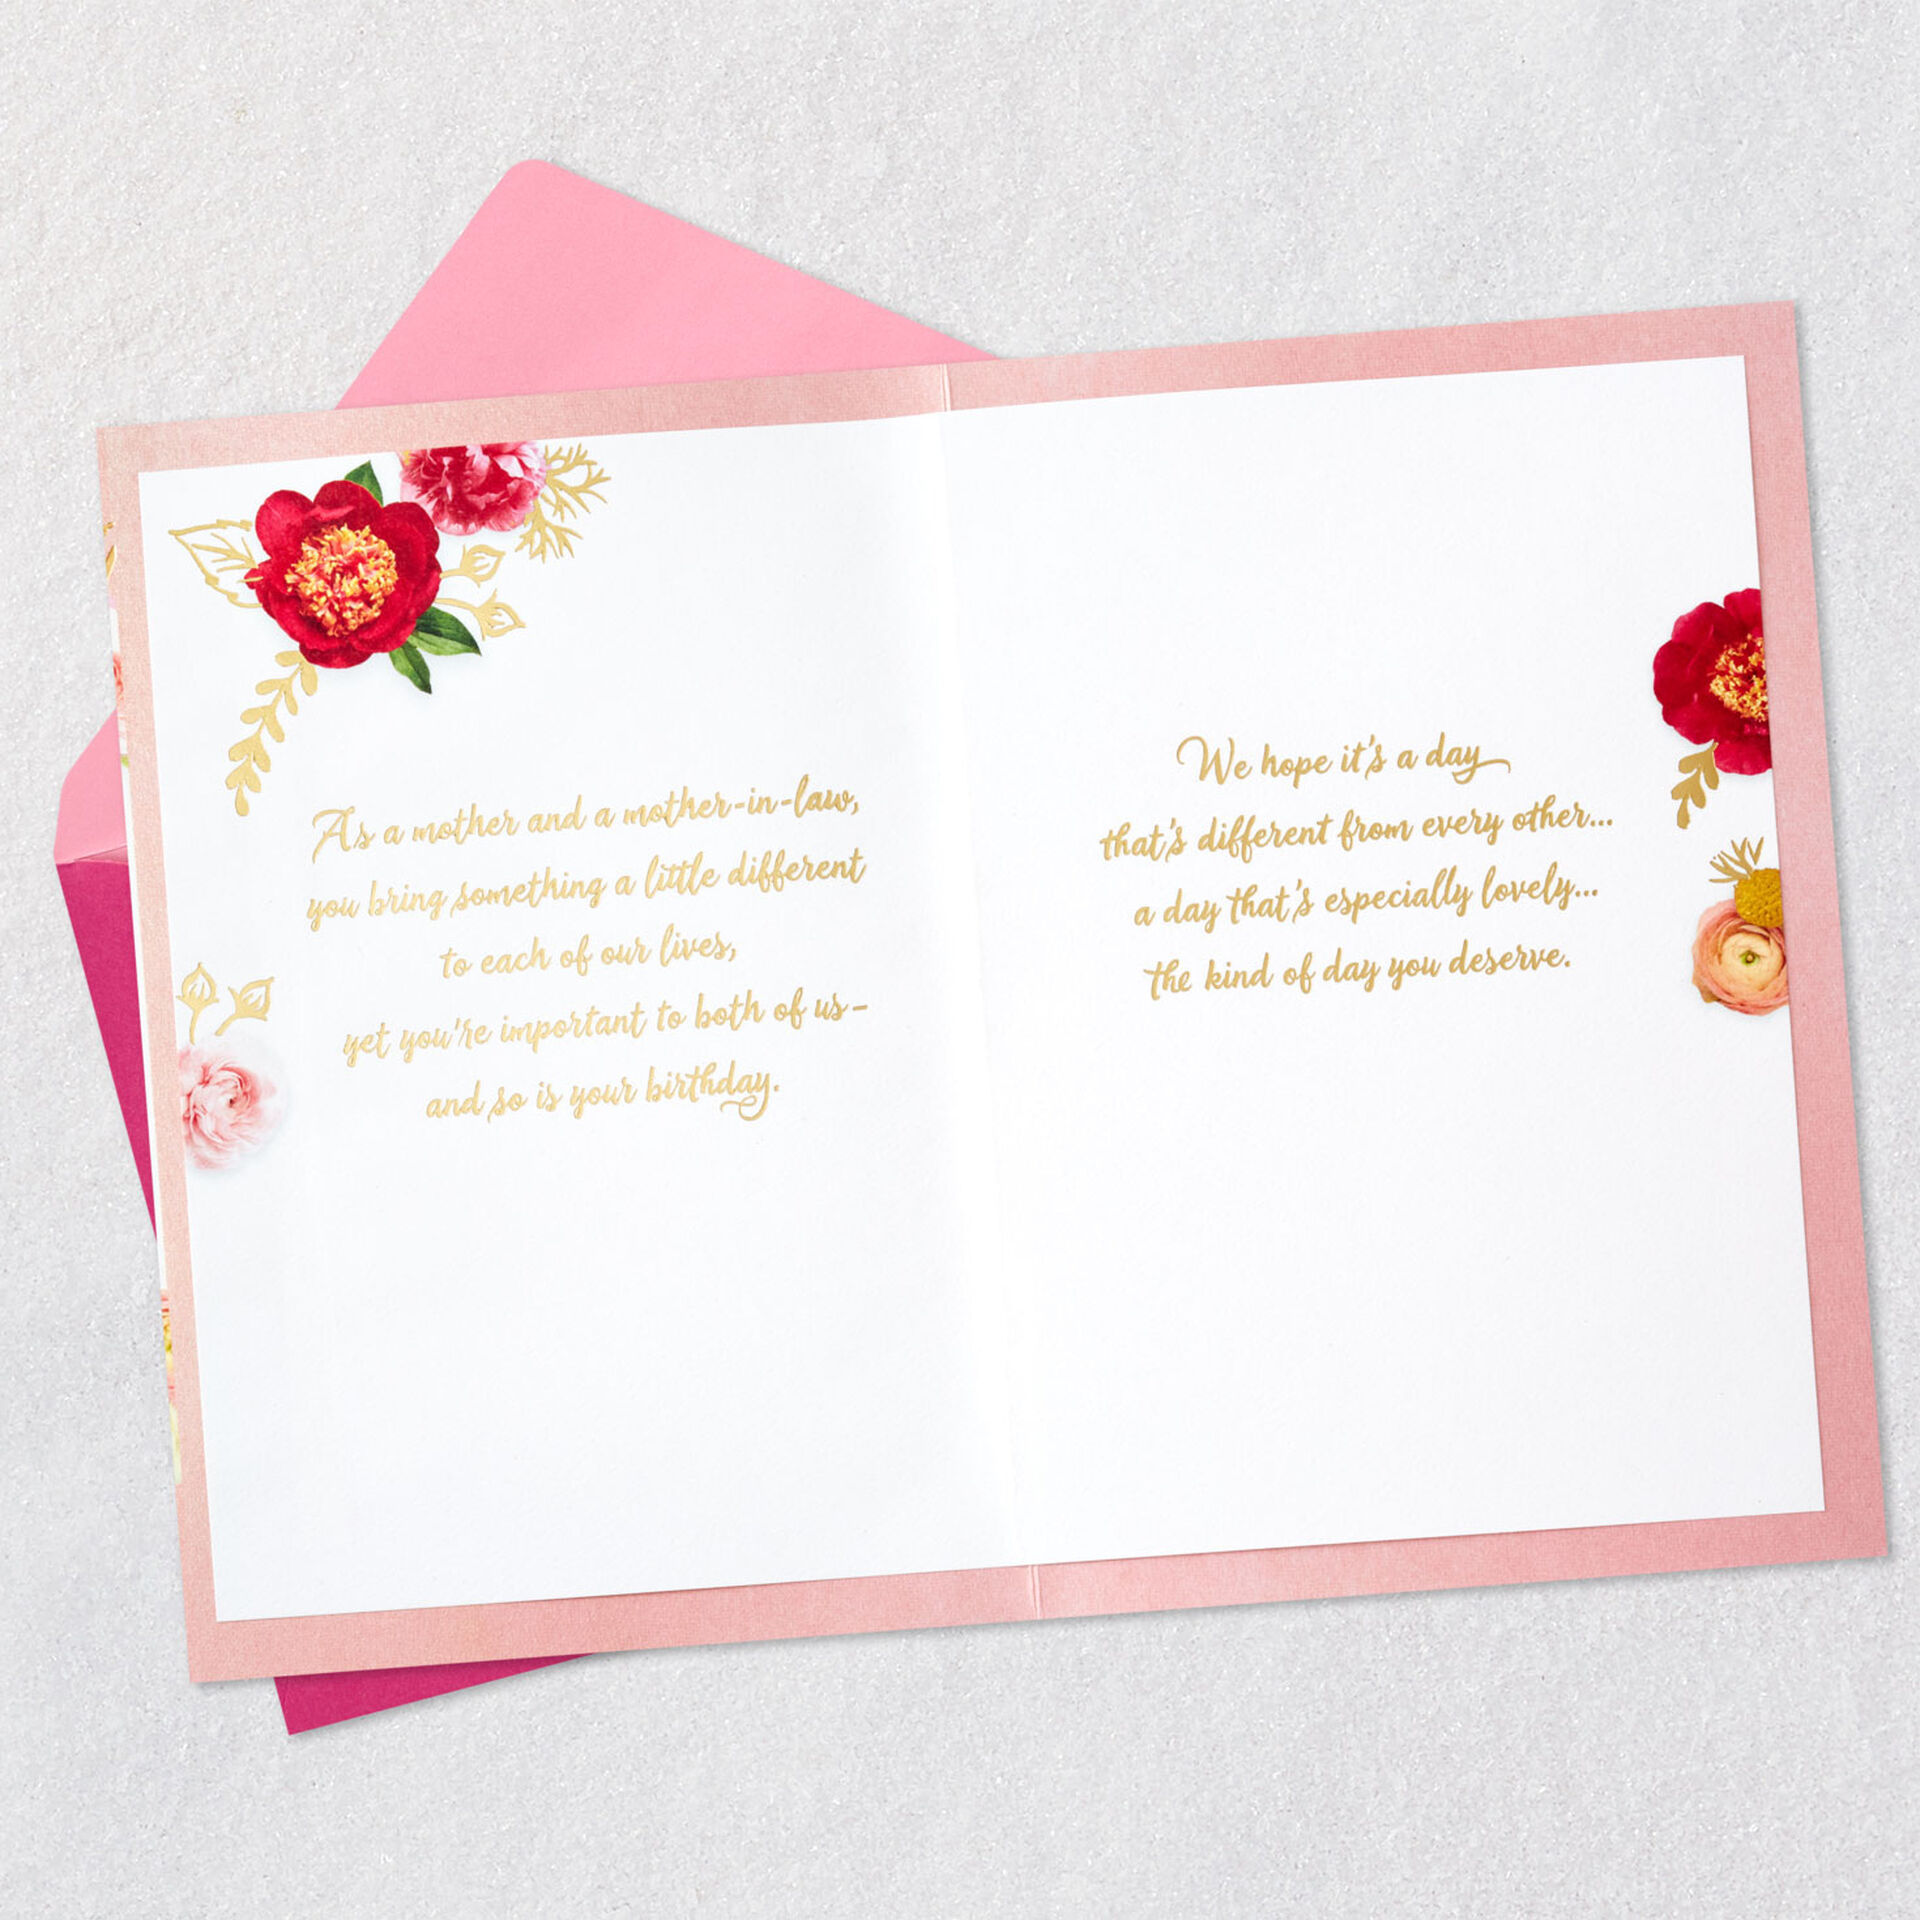 Rose-Wreath-Birthday-Card-for-Mom-From-Spouses_659FBD9301_03